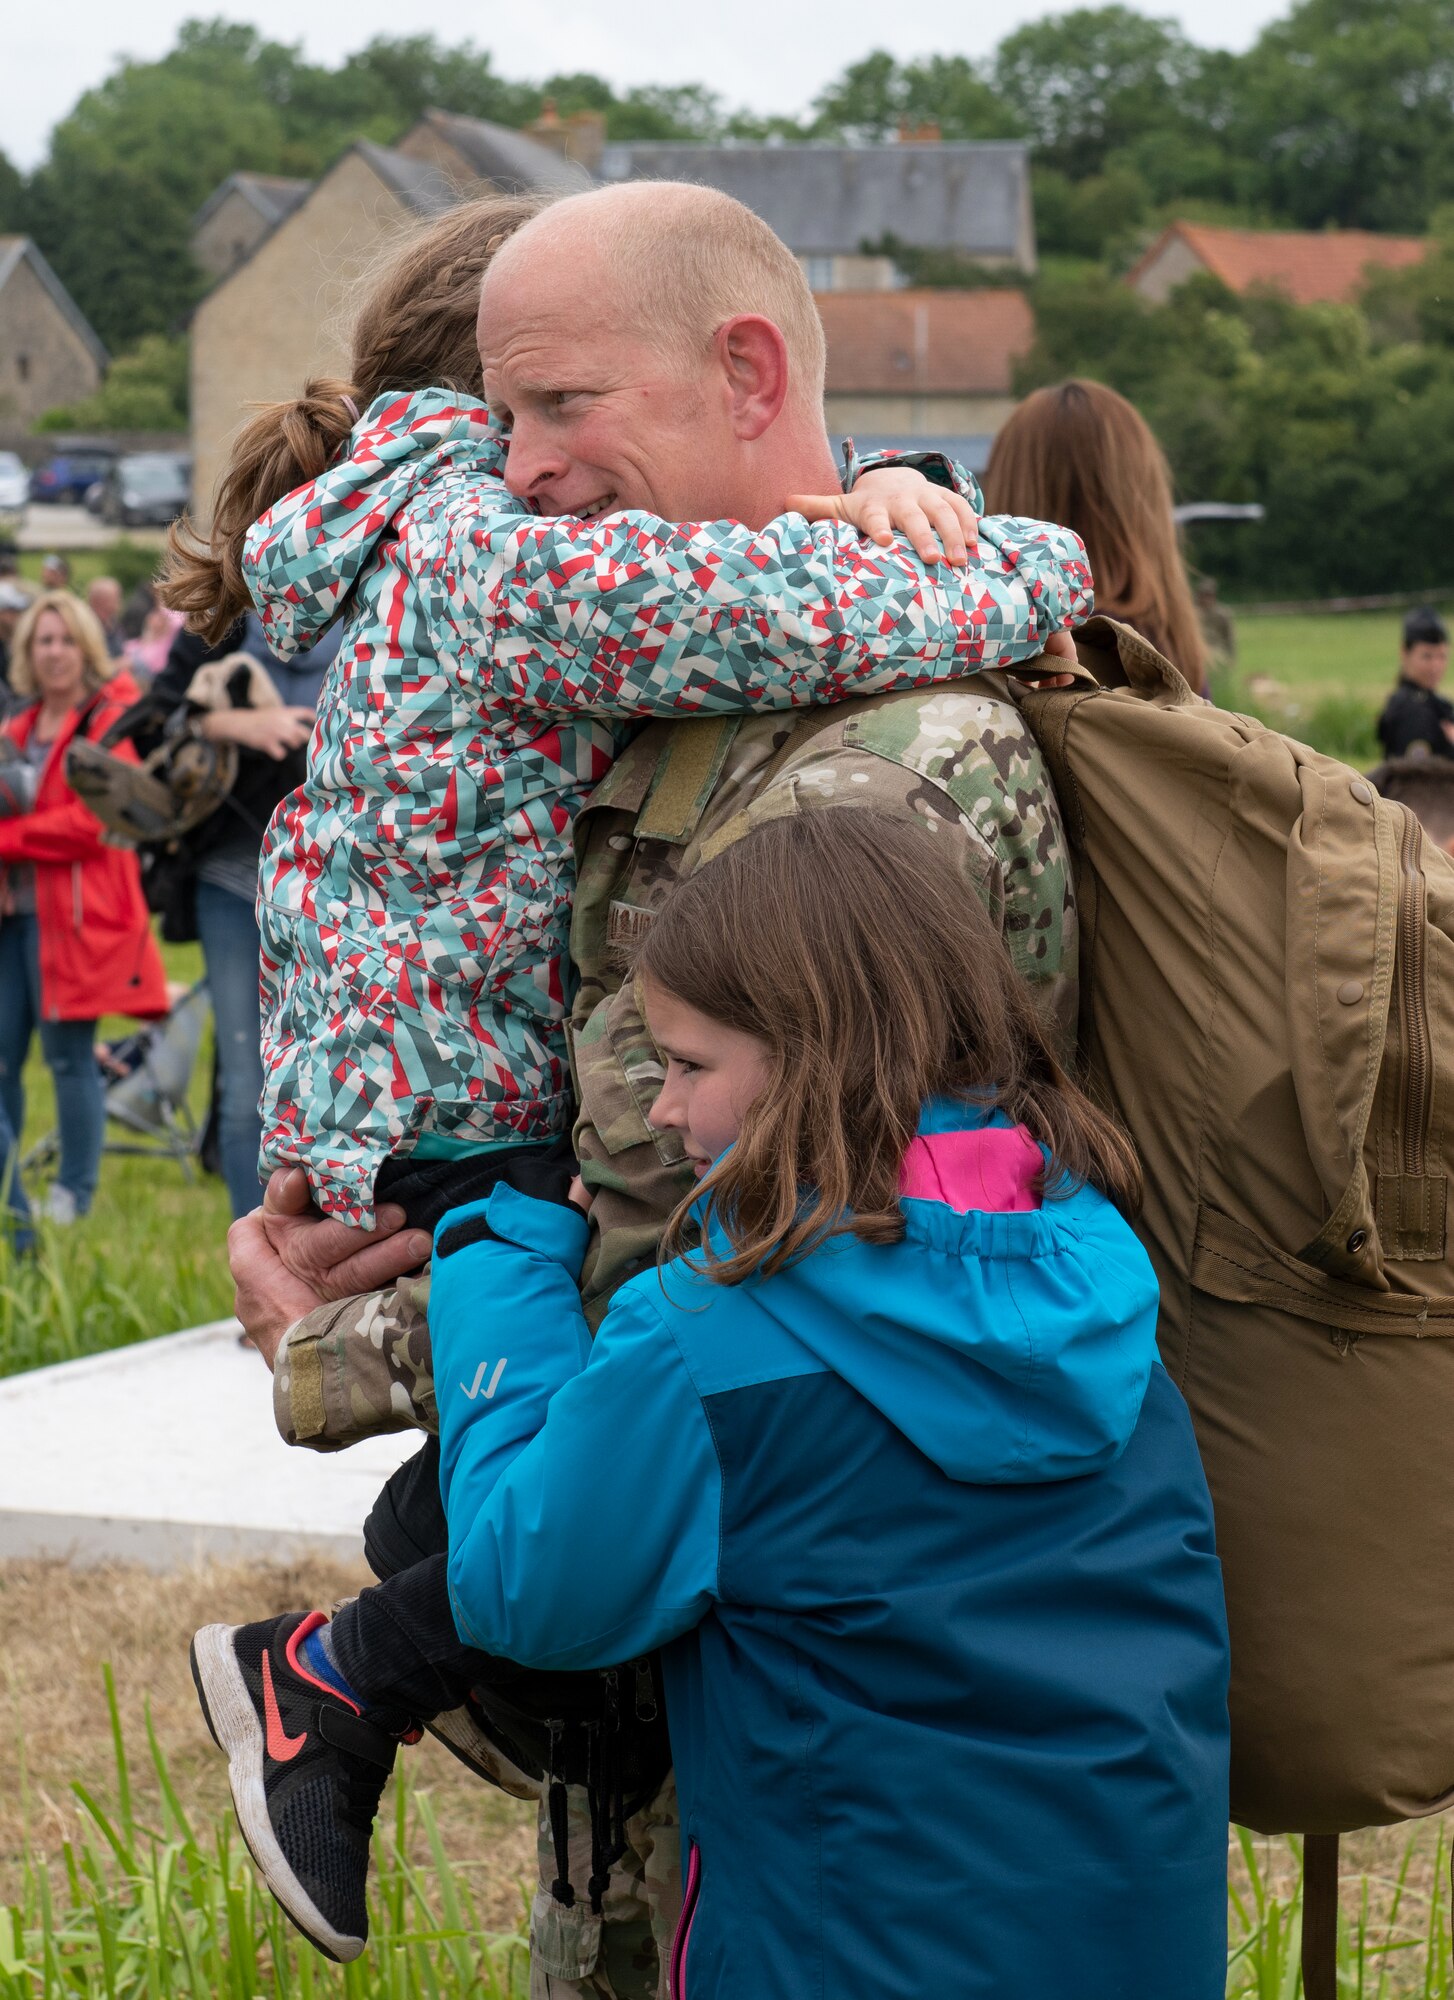 U.S. Air Force Lt. Col. Jake Miller, 752nd Special Operations Group deputy commander, embraces his daughters at the D-Day 75 Commemorative Airborne Operation in Sainte-Mere-Eglise, France, June 9, 2019. This commemorative airborne operation was an opportunity for multinational forces to honor the past and simultaneously work to secure the future. Training together in the very same place that trans-Atlantic resolve began 75 years ago demonstrates the partnerships and bonds that we highly value and continue to benefit from to this day. (U.S. Air Force photo by Airman 1st Class Jennifer Zima)